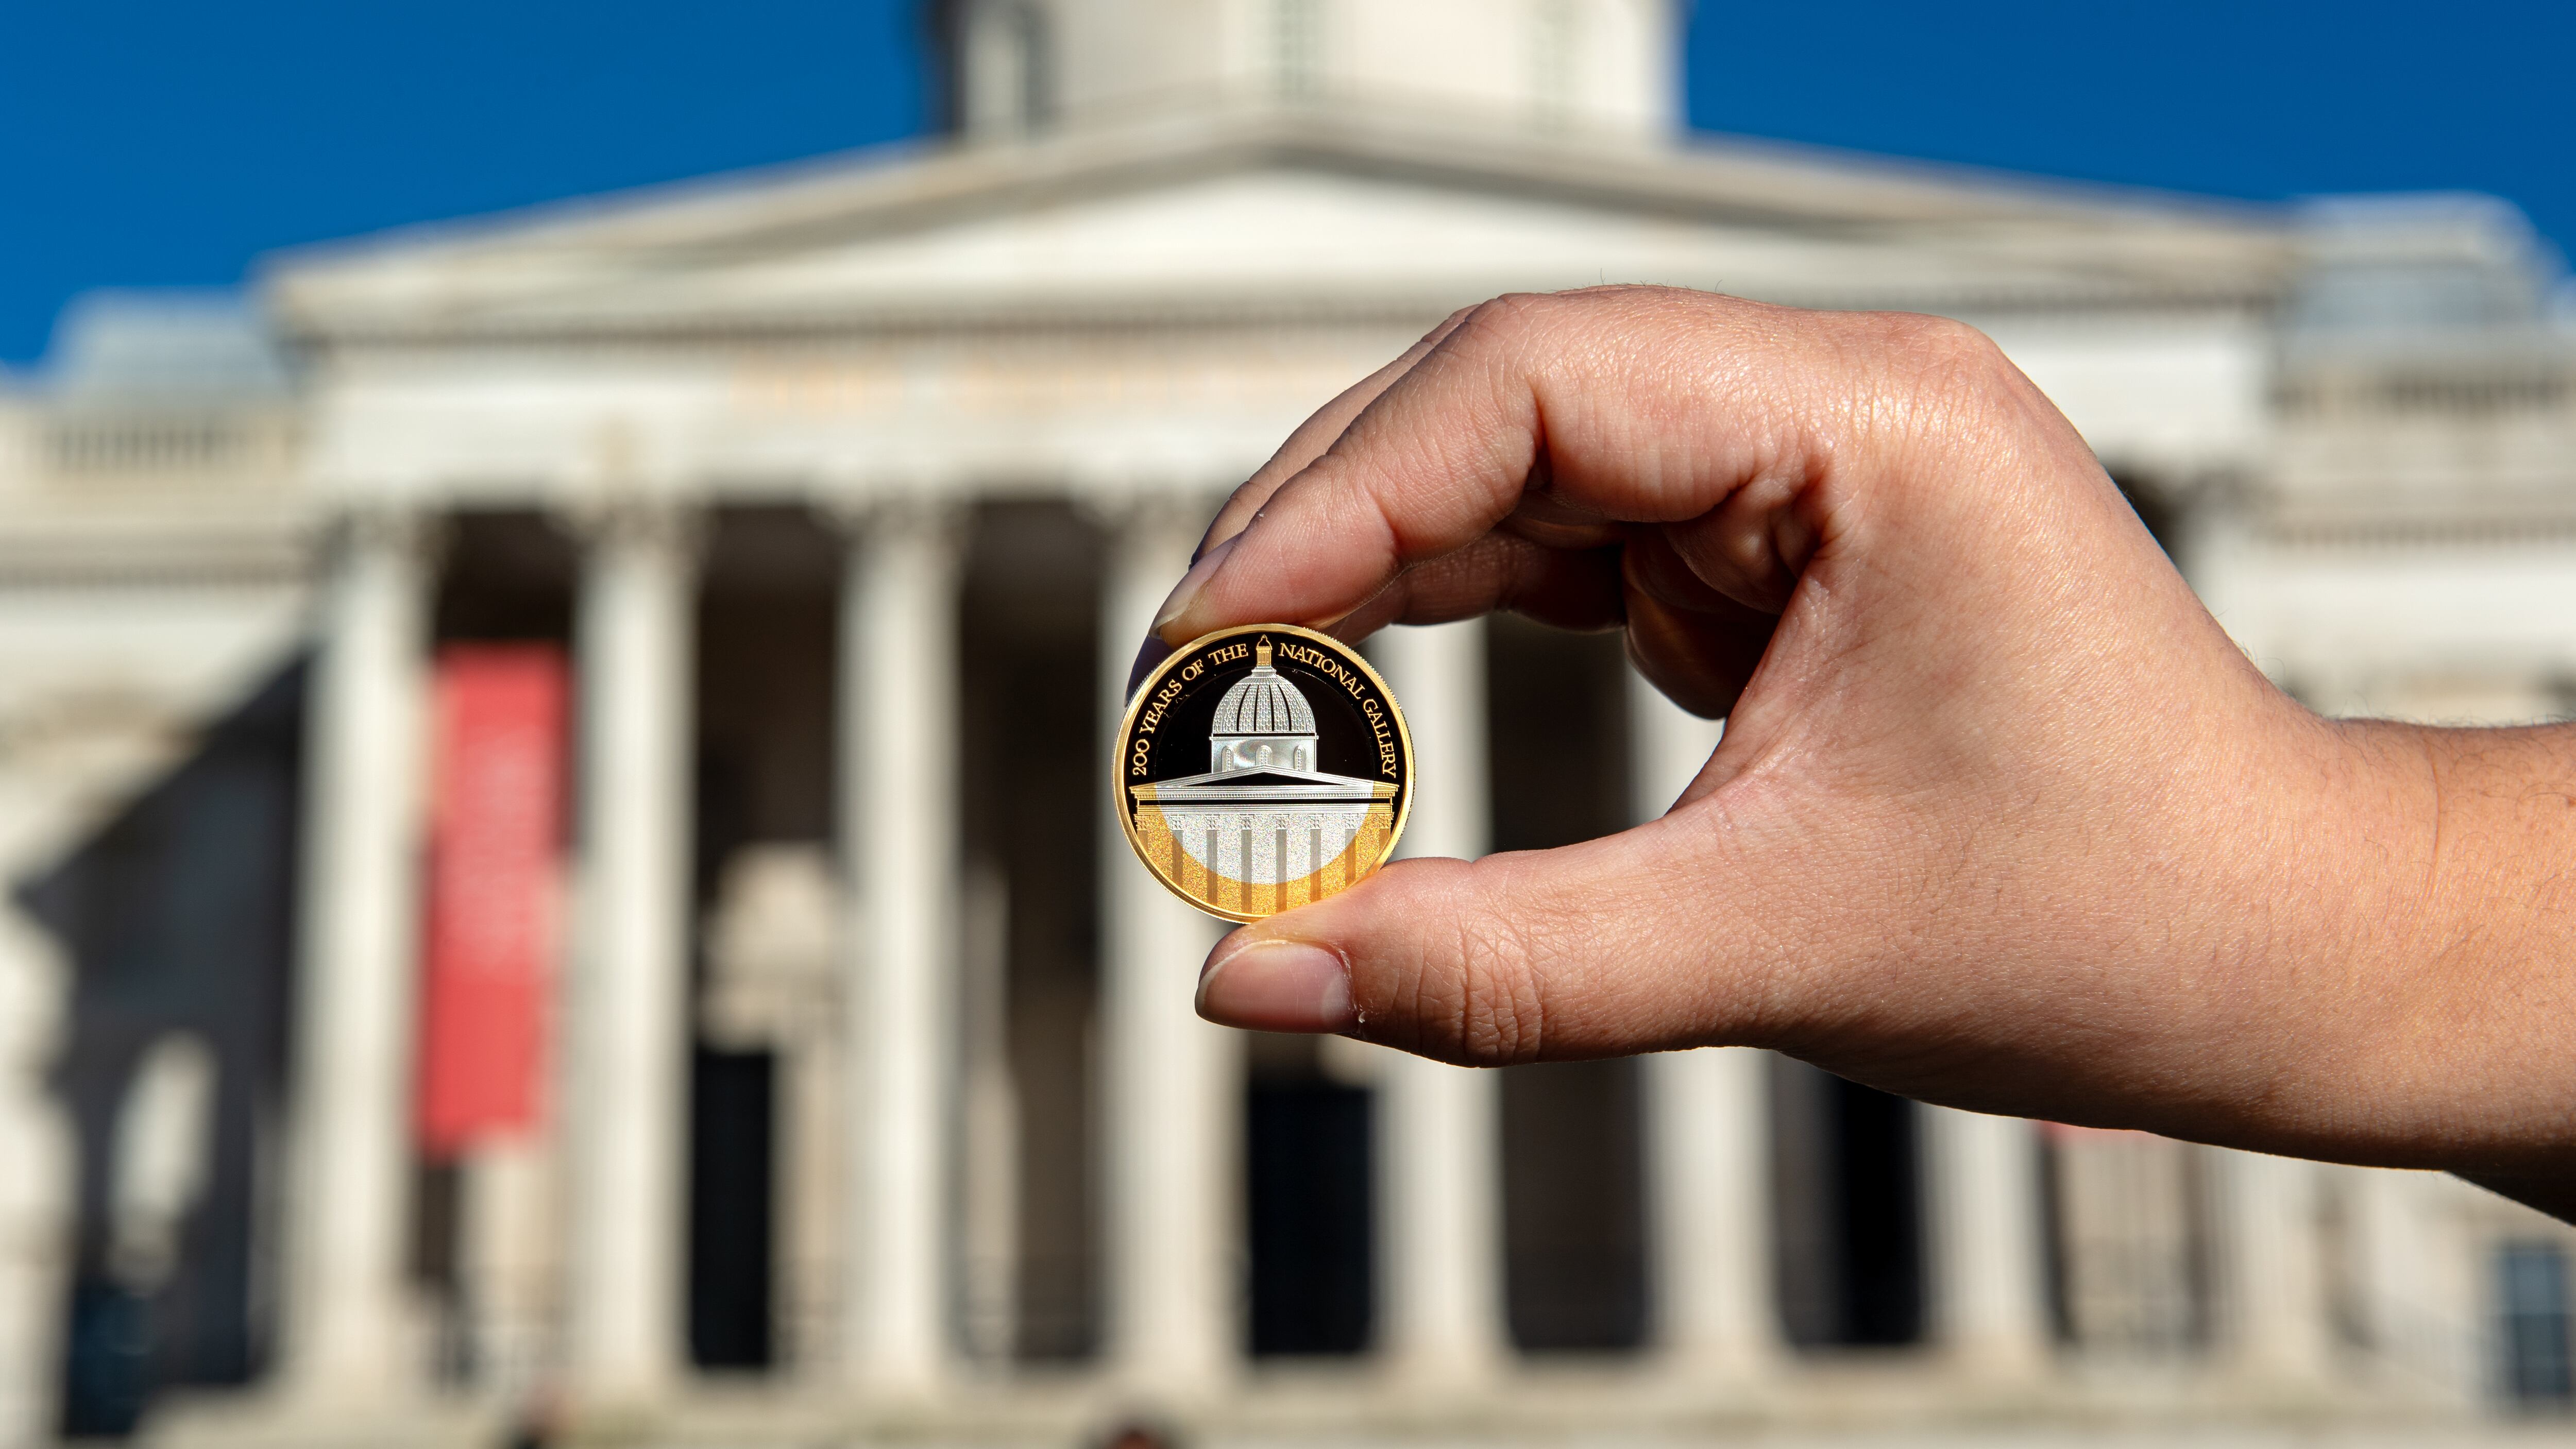 The £2 coin has been launched to mark the Gallery’s bicentenary celebrations